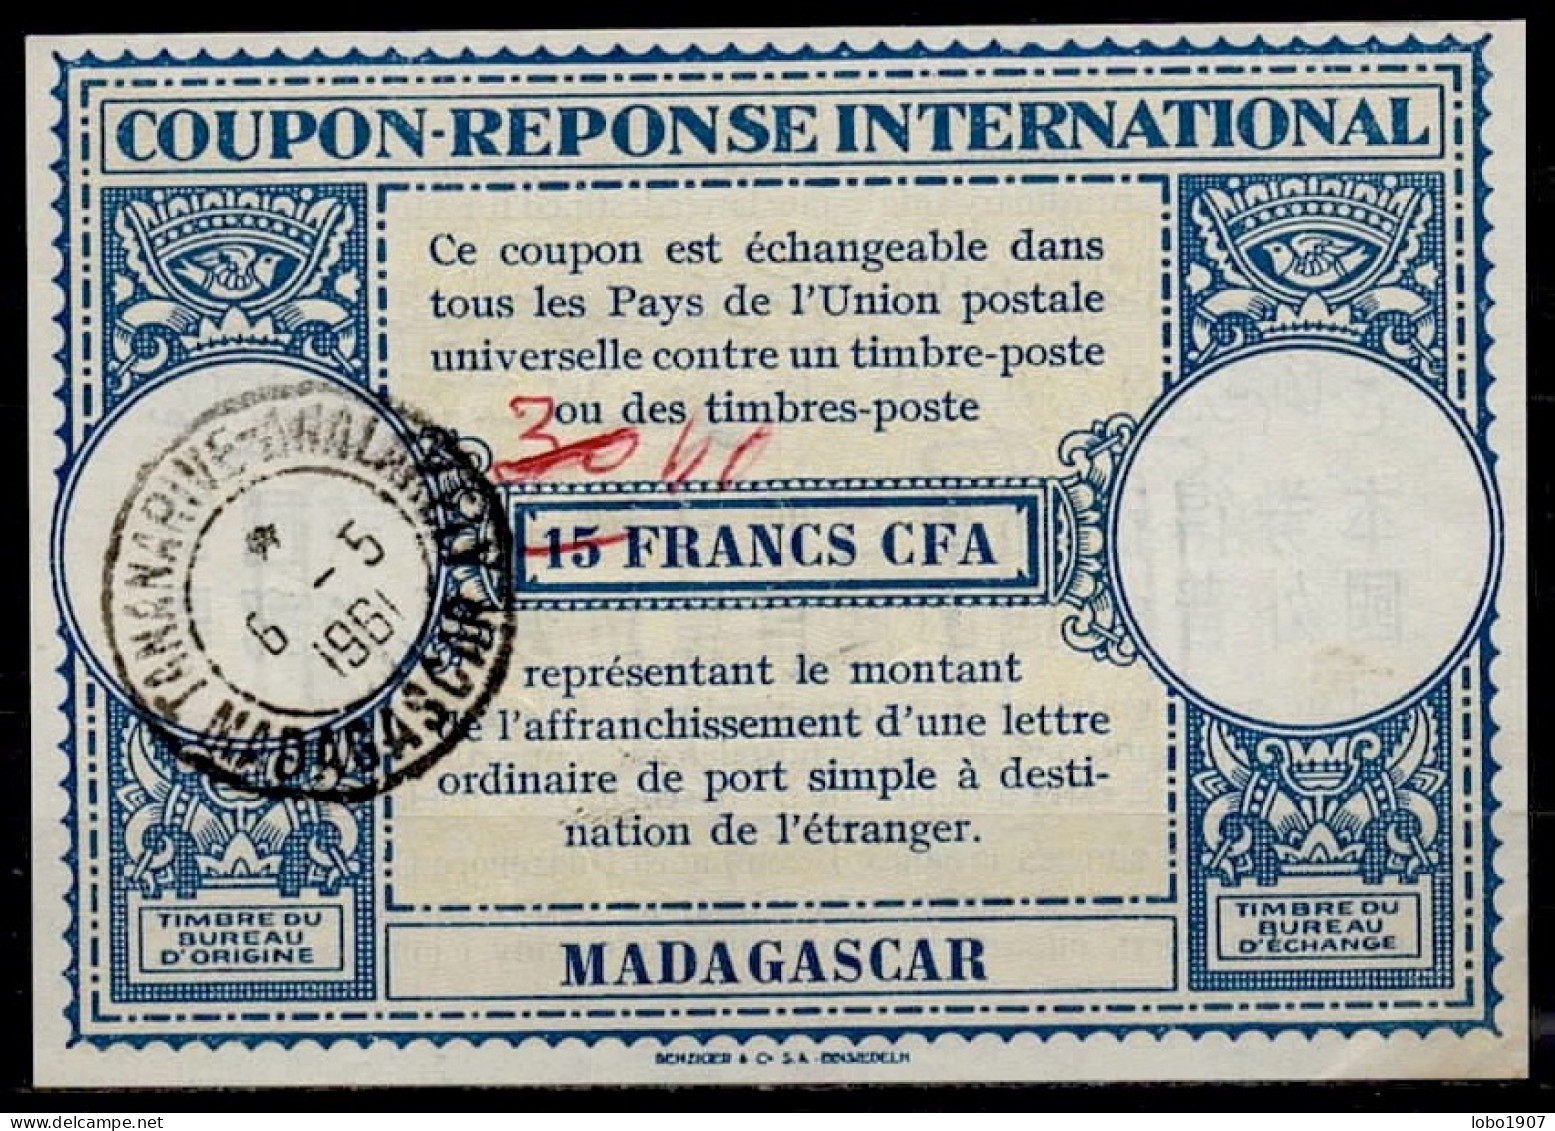 MADAGASCAR  Lo15  40 / 30 / 15 FRANCS CFA Int. Reply Coupon Reponse Antwortschein IRC IAS TANANARIVE ANALAKELY 06.05.61 - Covers & Documents